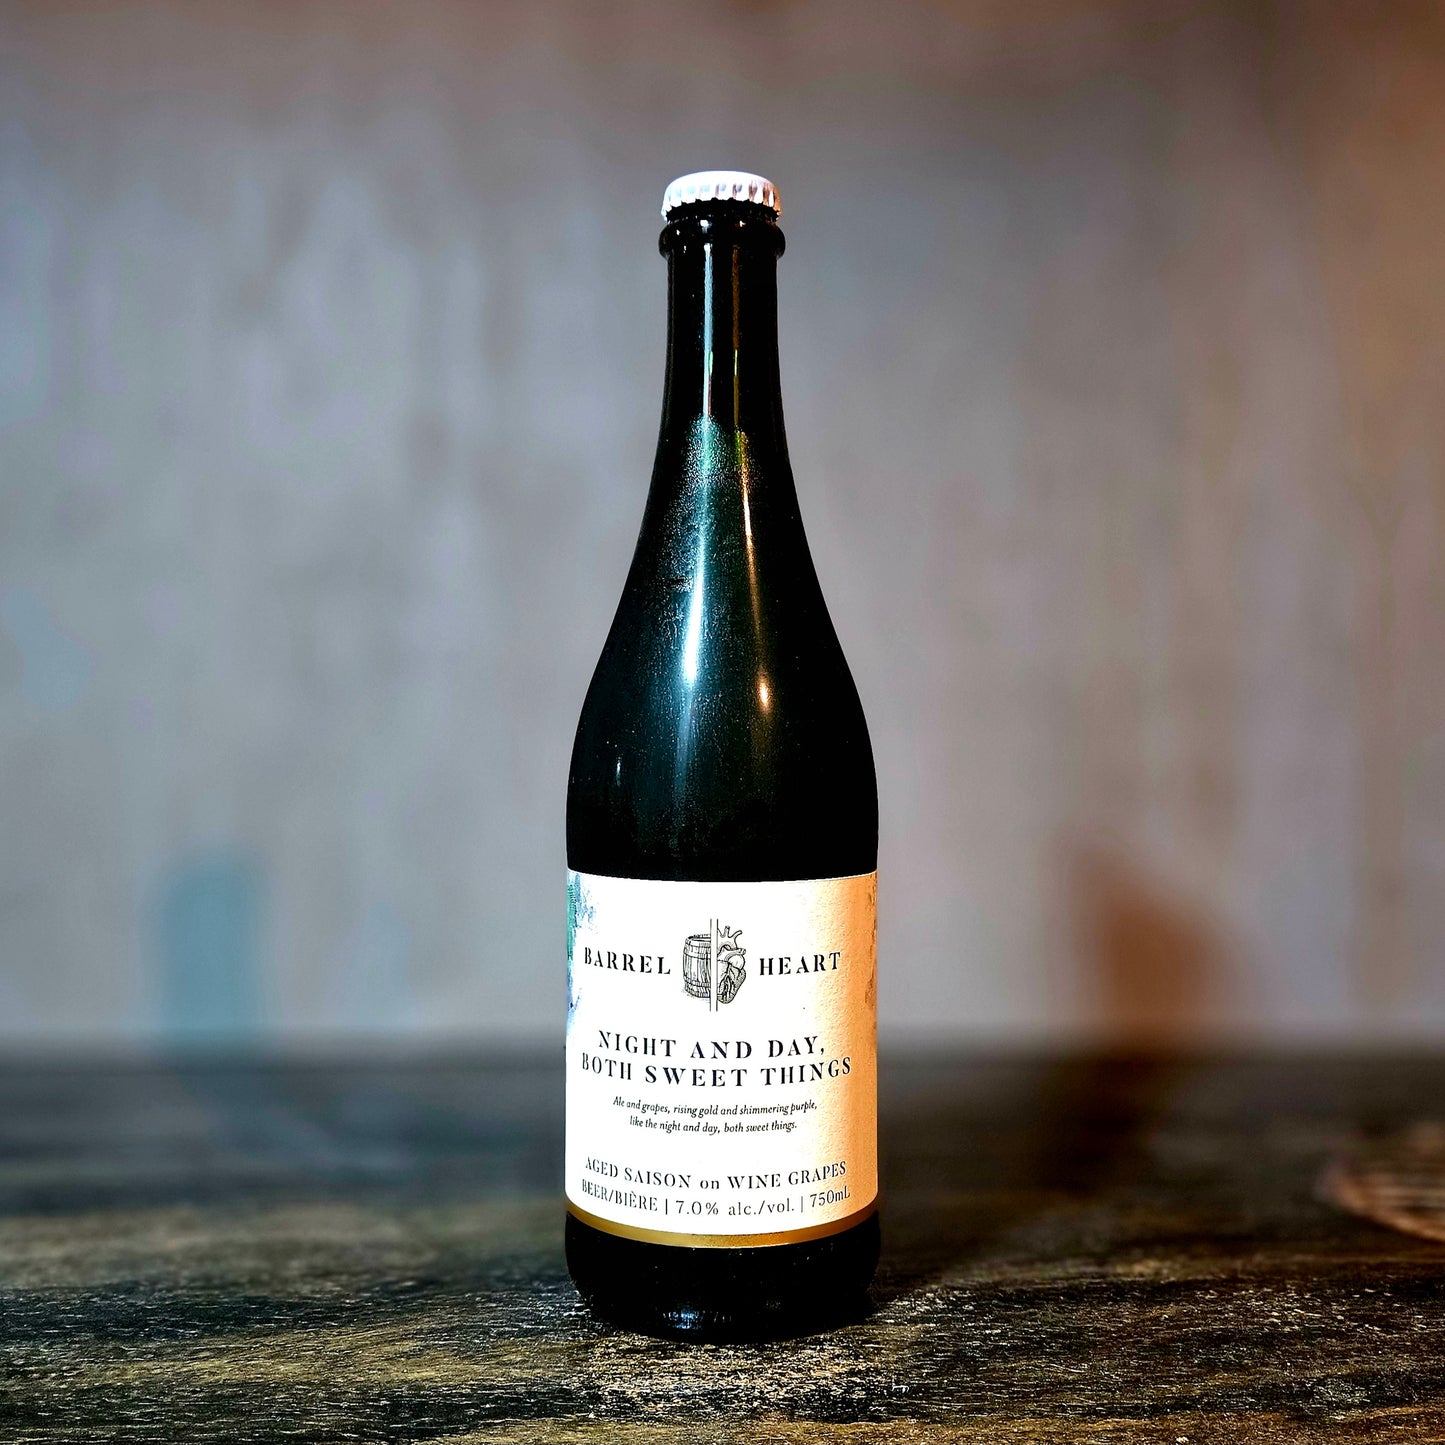 Barrel Heart "Night and Day, Both Sweet Things" Saison (2021)